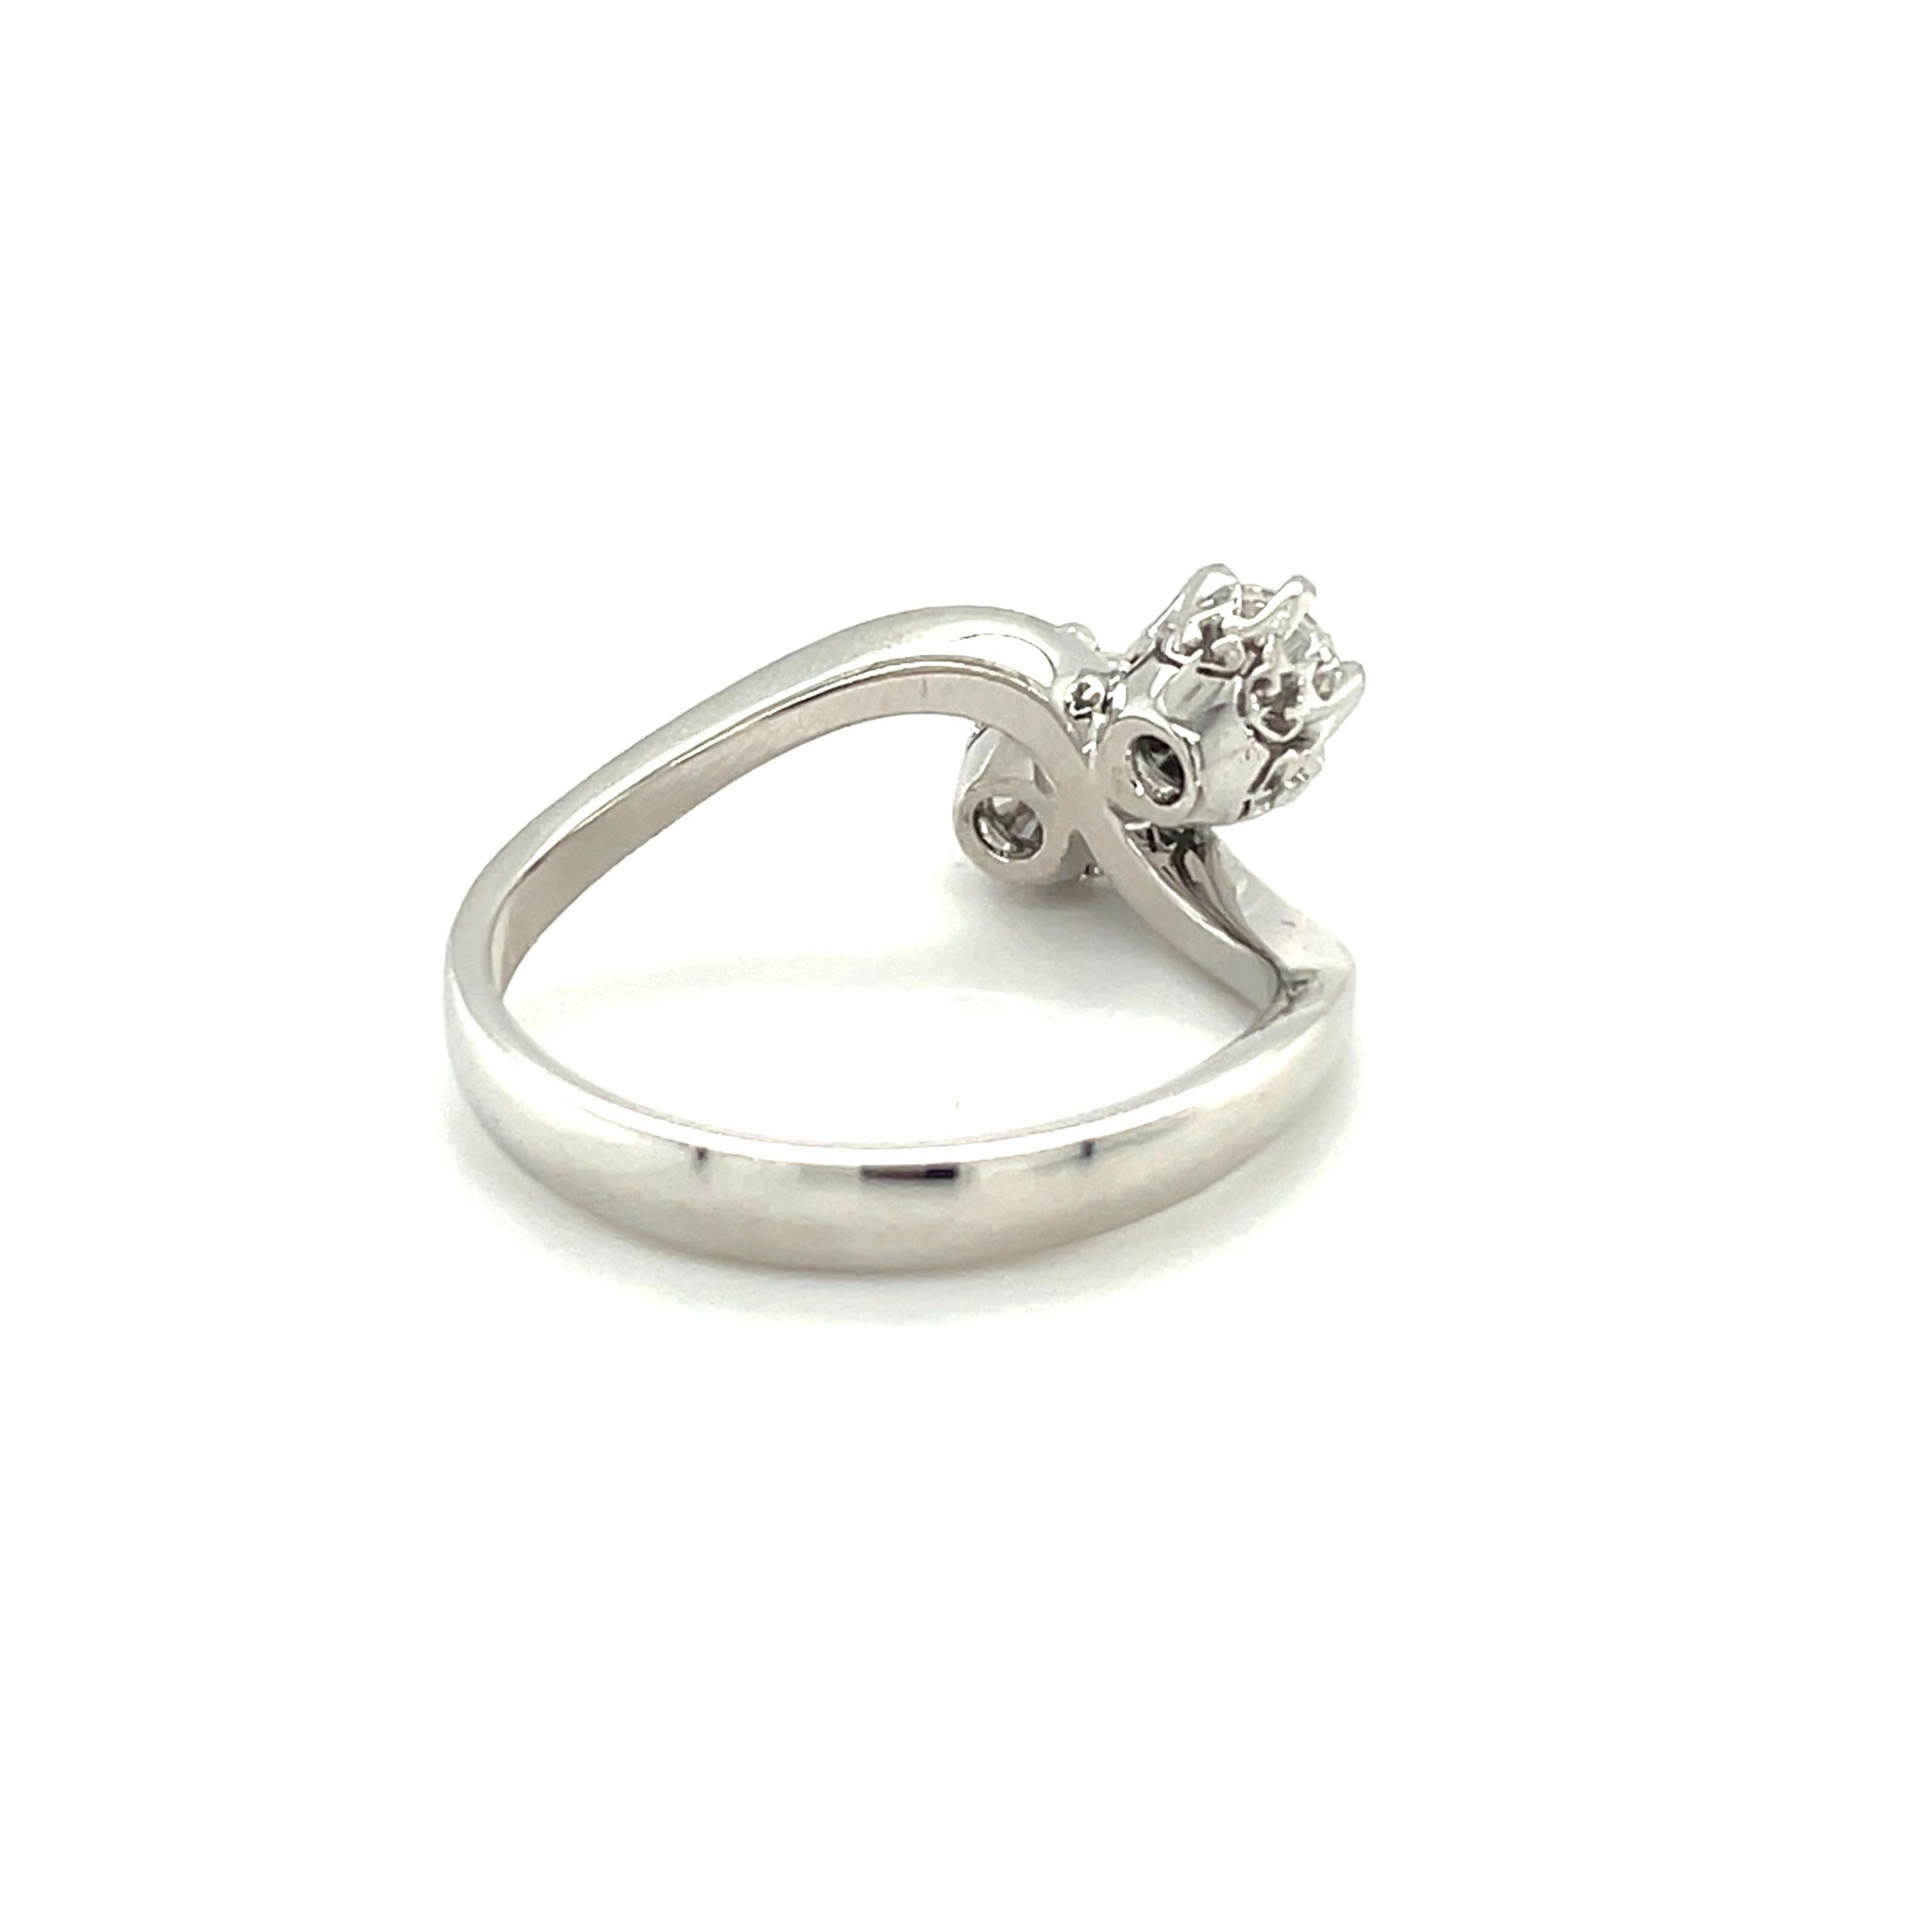 18K white gold engagement two stone ring is from ANNIVERSARY Collection. This ring is made of 2 natural white round diamond in G color and VS clarity in total of 0.68 Carat, as You & Me forever. Total metal weight is 4.36gr. The ring size is 55.1mm/